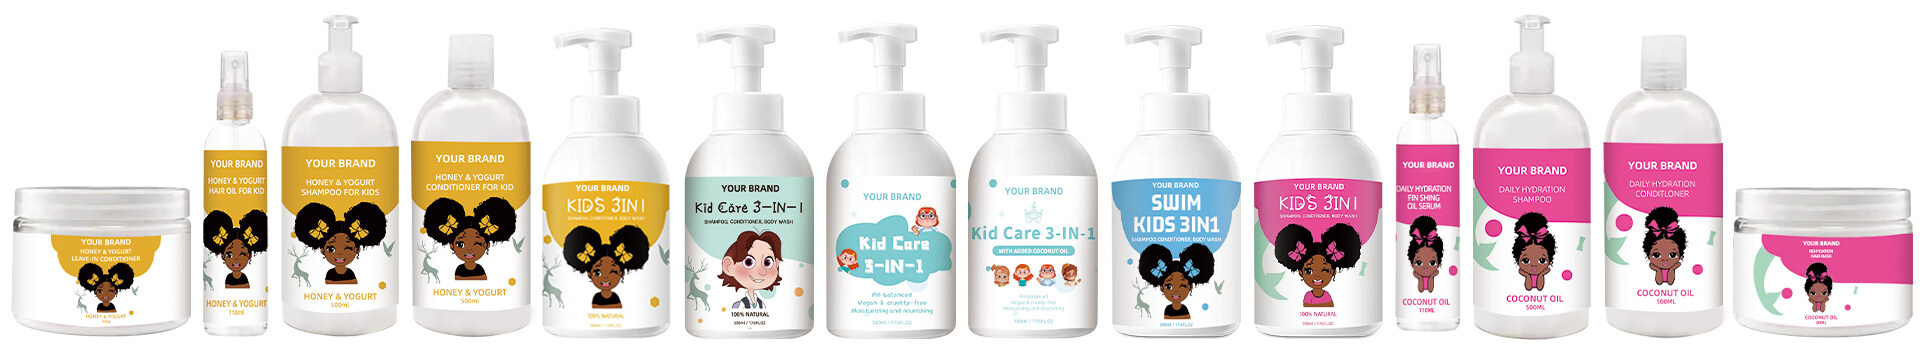 YOUR LOGO Natural Baby Hair Products Kids Leave-in Conditioner With Coconut Oil Smoothing Hair,YOUR LOGO Vegan Kids Hair Wash Set Honey Yogurt Gently Cleanses Kids Curly Hair,YOUR LOGO Kids Mousse shampoo, conditioner and body wash,YOUR LOGO Curly Kids Mousse 3-IN-1 Shampoo，conditioner , body wash,YOUR LOGO 3-IN-1 Kids Mousse shampoo conditioner and body wash